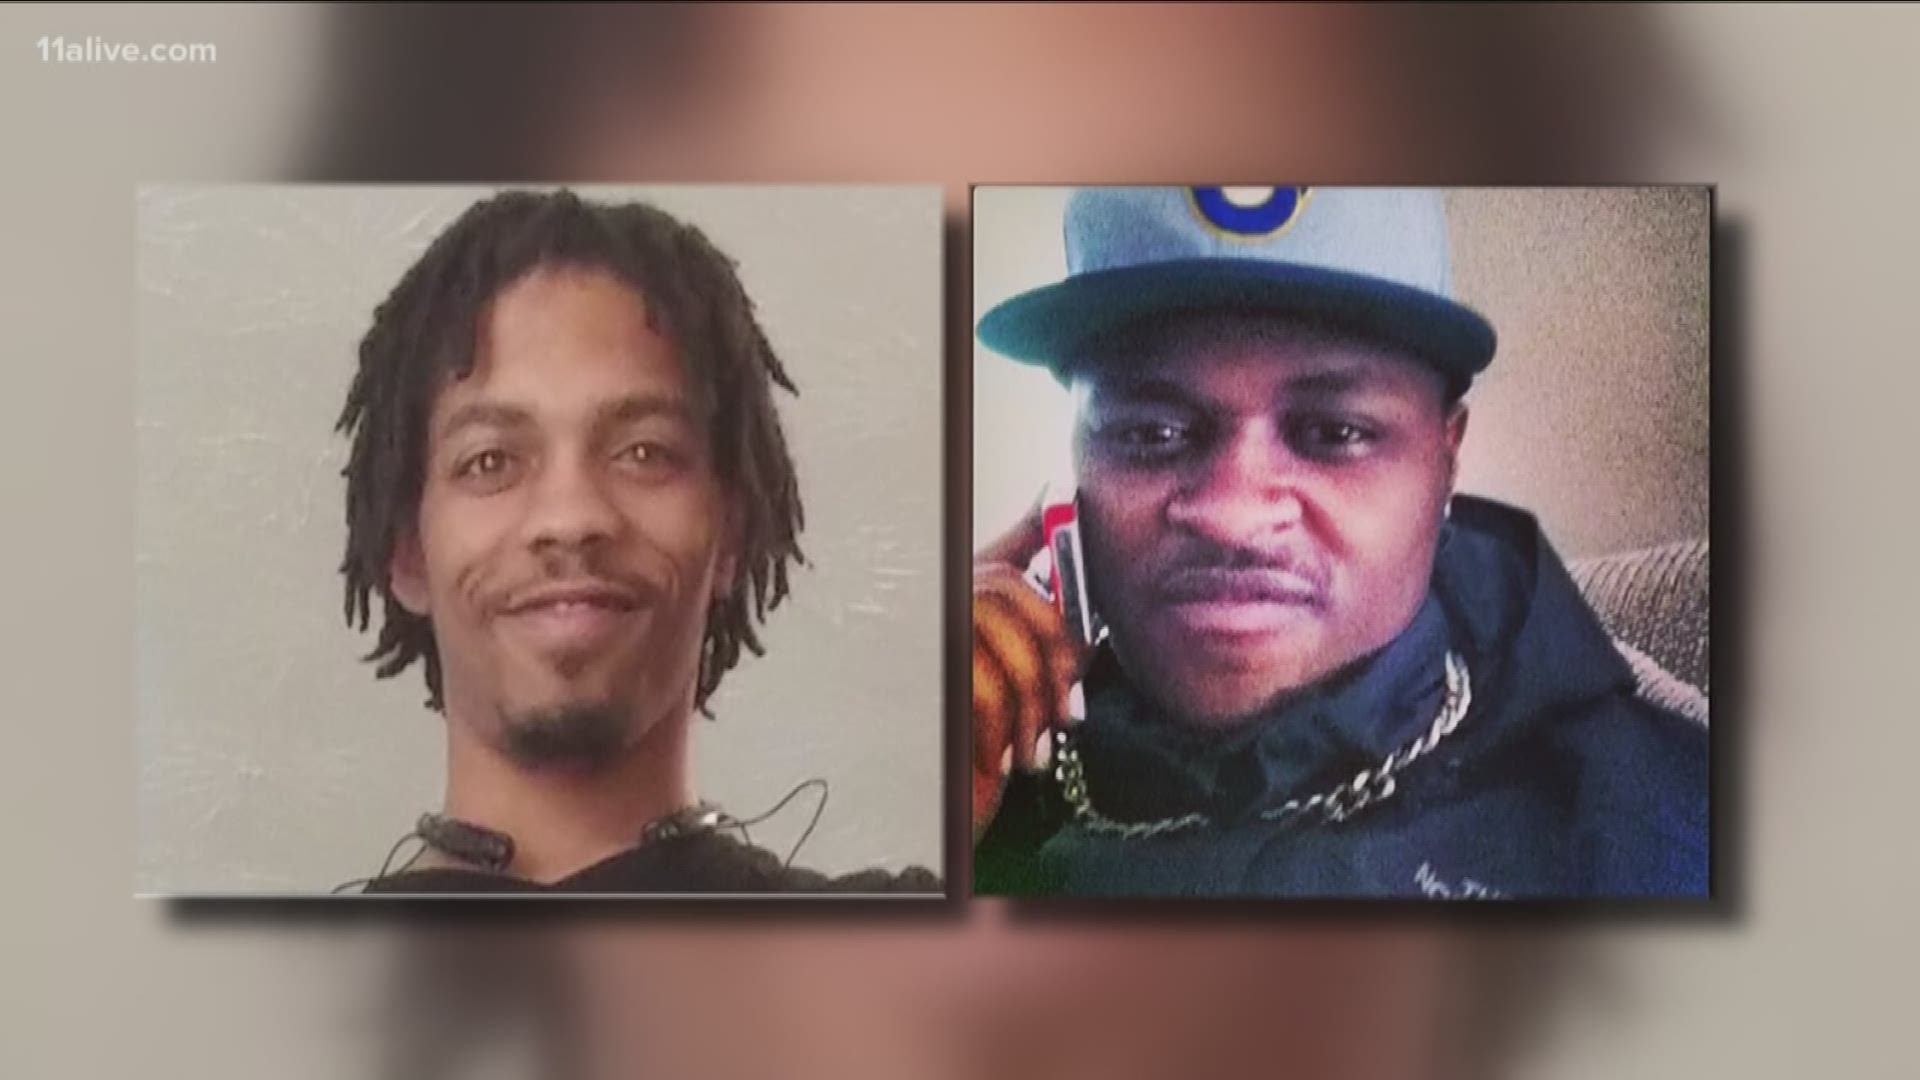 It’s been four years since a mother walked in to an apartment and found her son and another man shot to death. Police are still searching for those responsible.